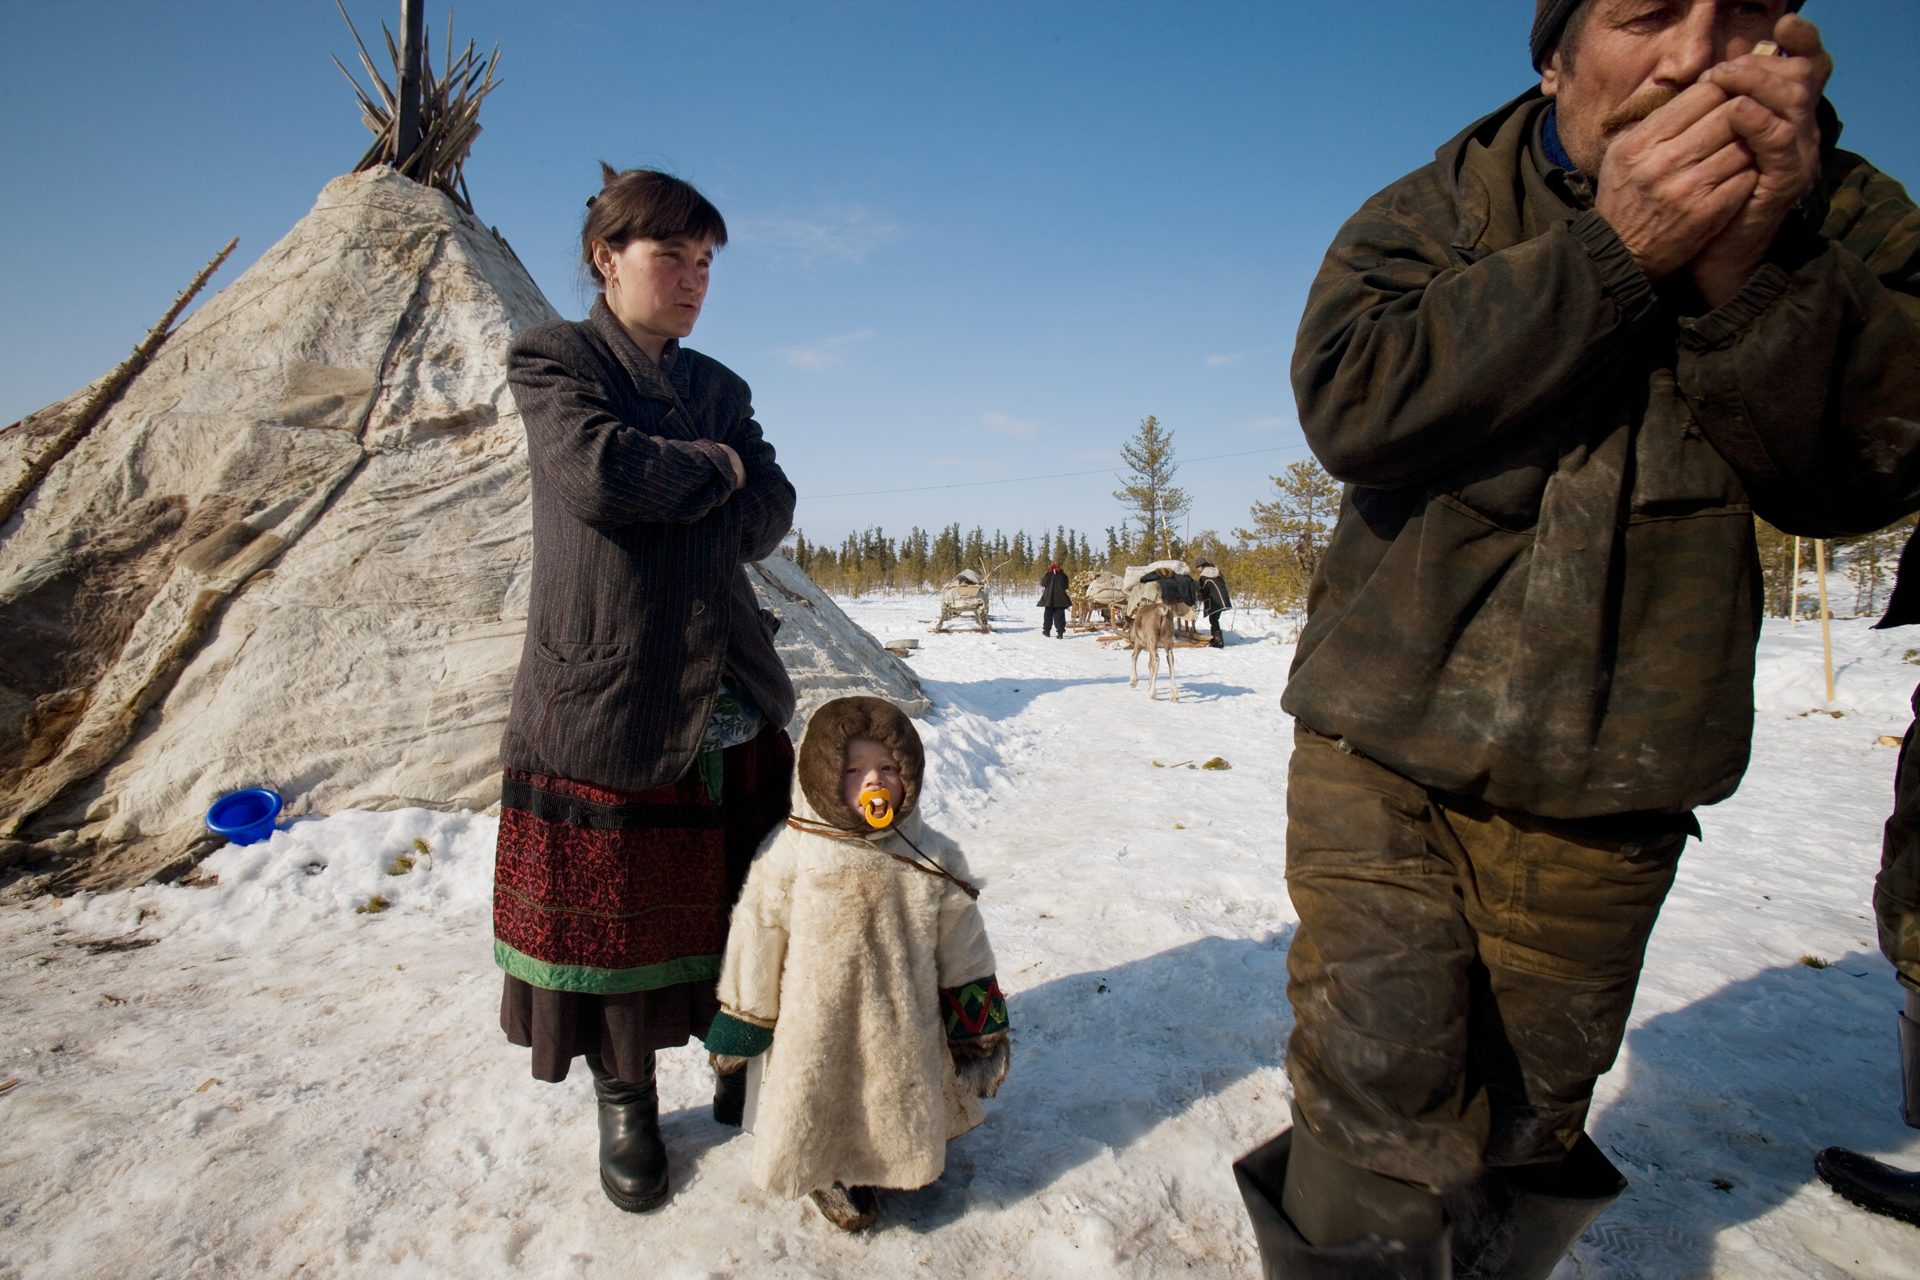  Traditional life for this young family of Nenets is being threatened by booming oil development in the Khanty-Mansiysk region.  Near Saranpaul, Russia  